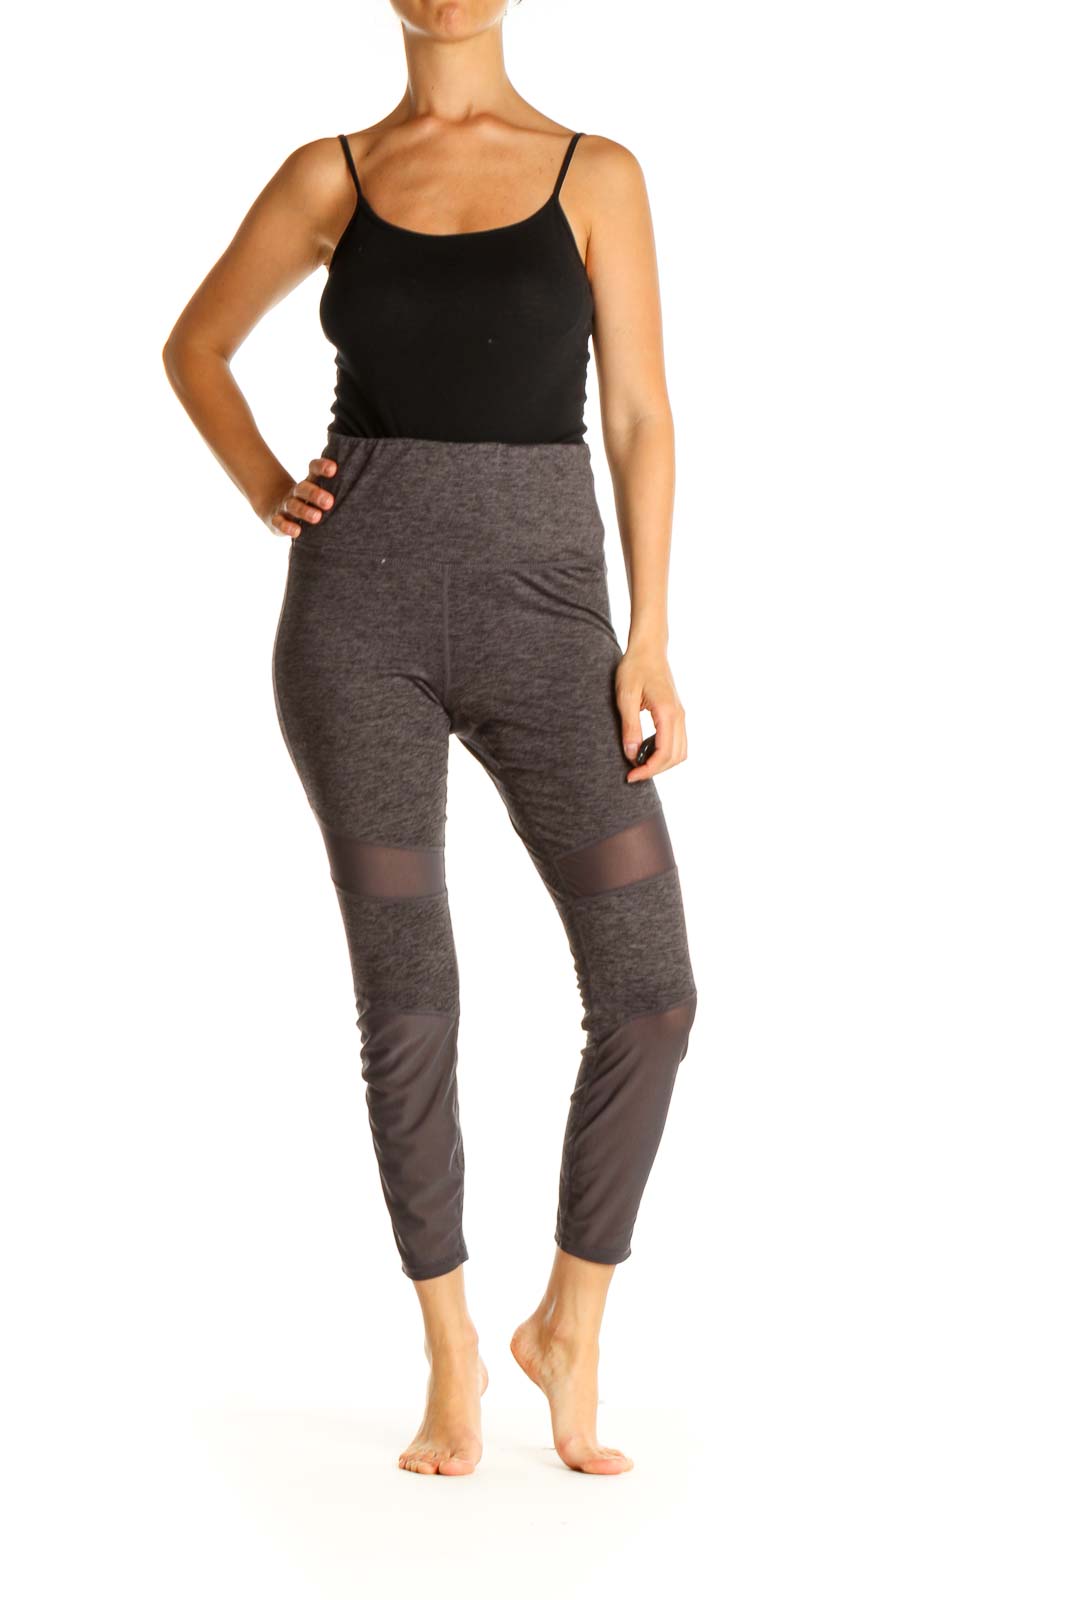 Gaiam - Gray Textured All Day Wear Leggings Polyester Spandex